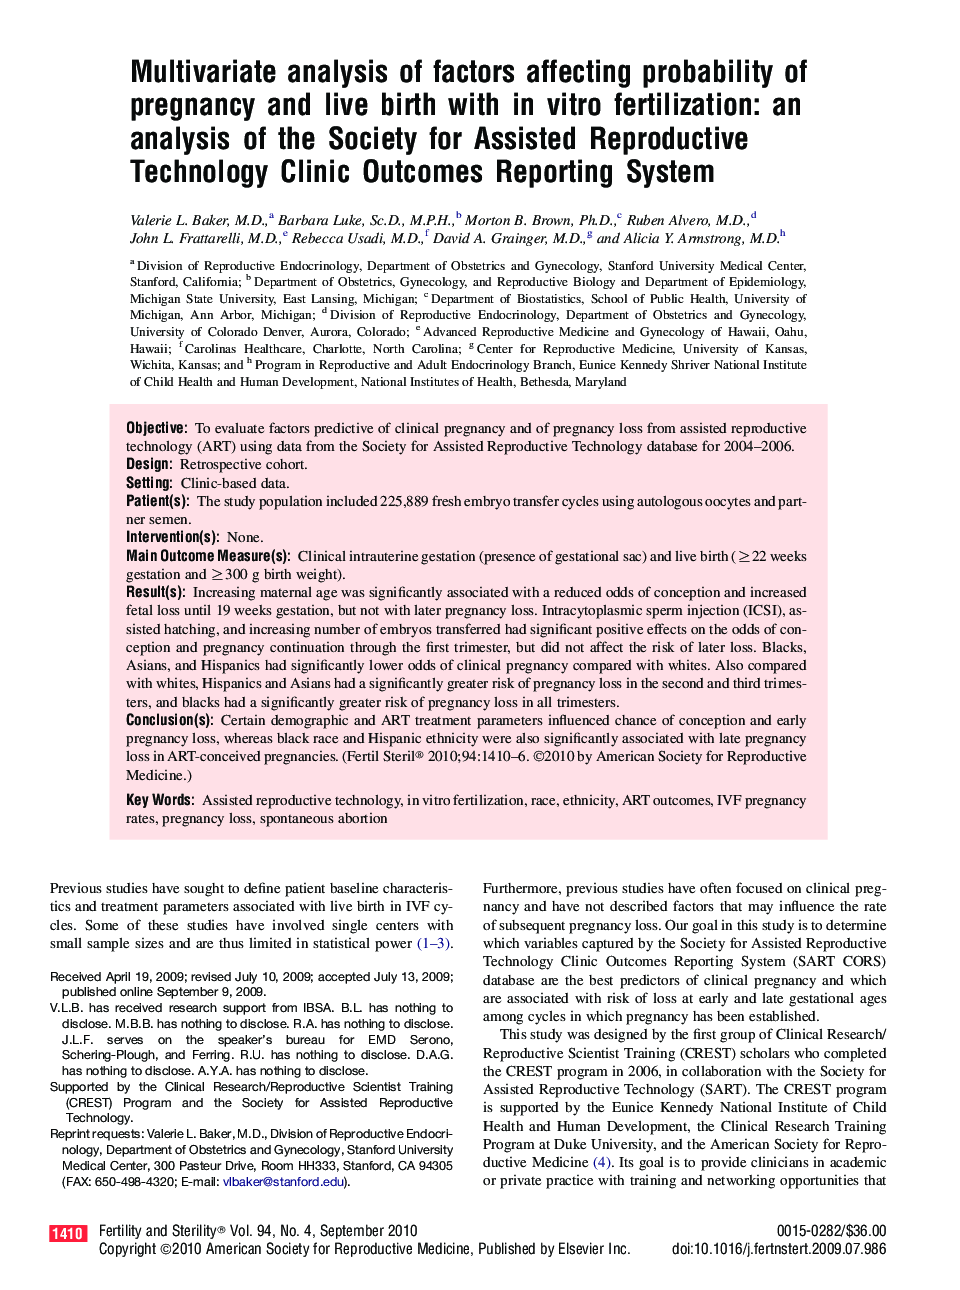 Multivariate analysis of factors affecting probability of pregnancy and live birth with in vitro fertilization: an analysis of the Society for Assisted Reproductive Technology Clinic Outcomes Reporting System 